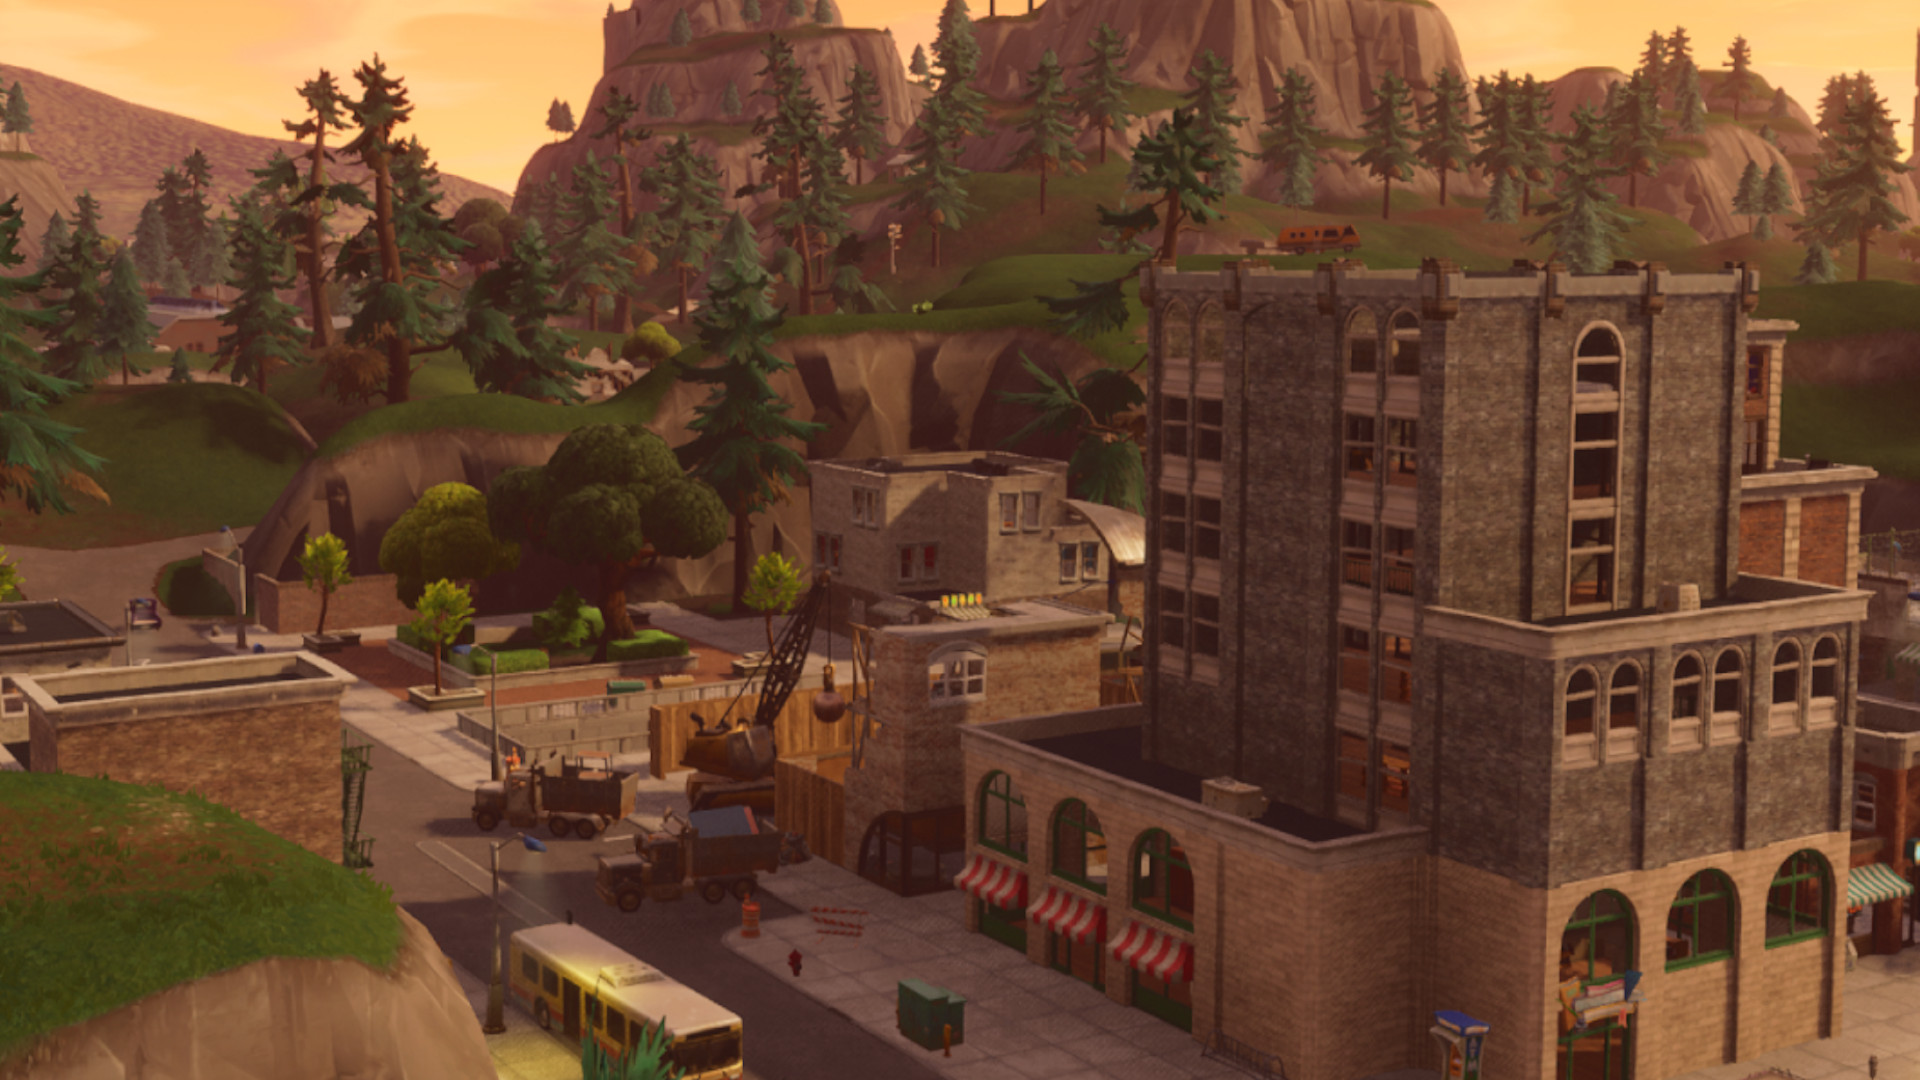 “One more sleep” until Fortnite 19.10 – and the return of Tilted Towers?